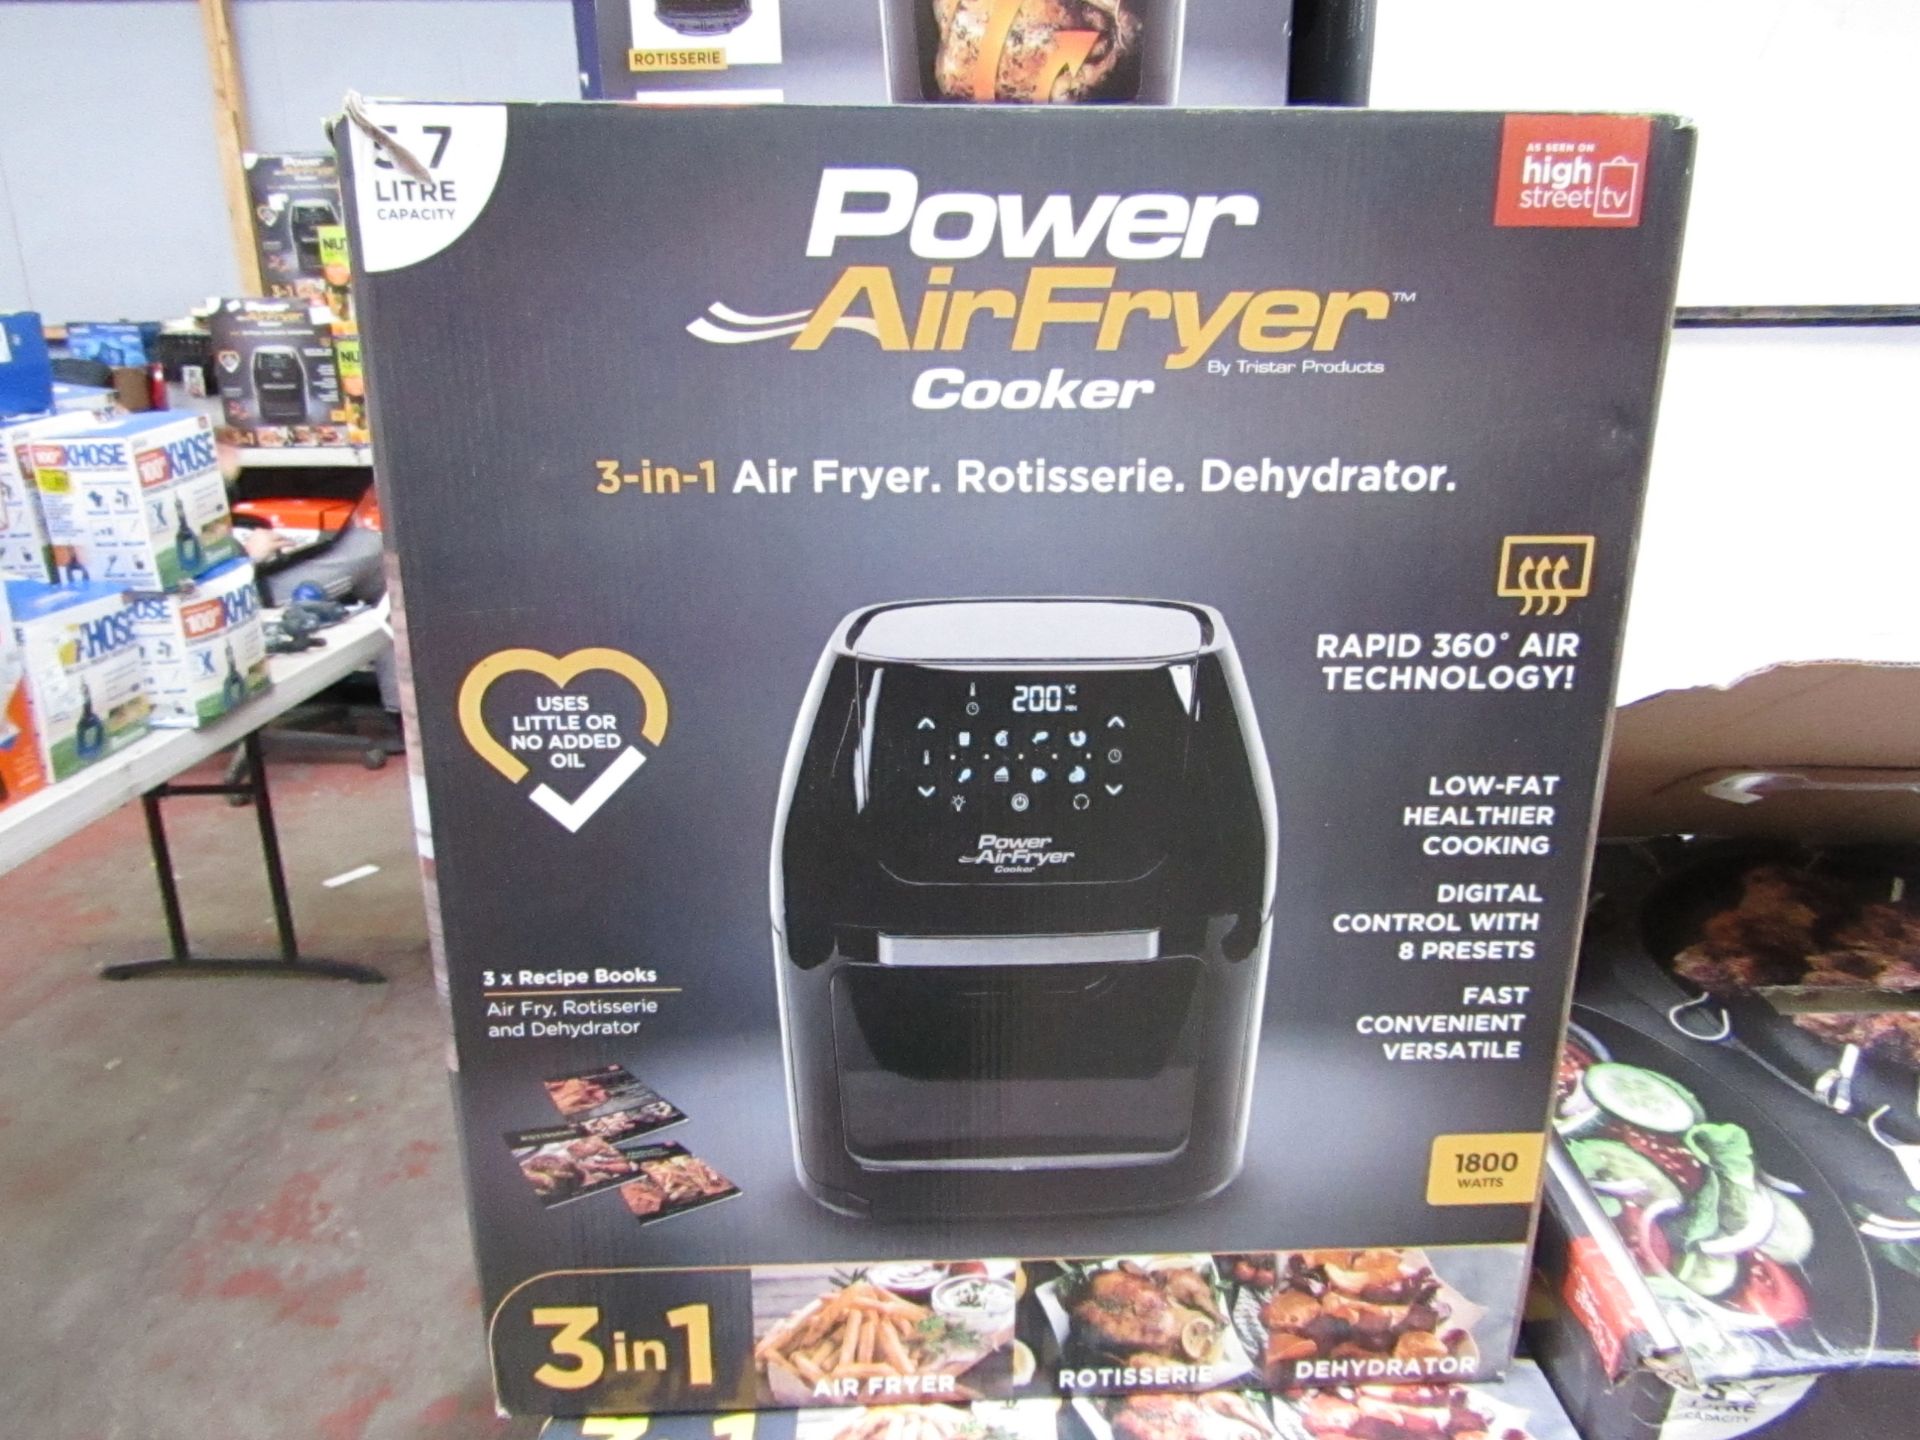 | 1X | POWER AIR FRYER 3 IN 1 5.7L | UNTESTED, BOXED AND UNCHECKED FOR ACCESSORIES | NO ONLINE RE-